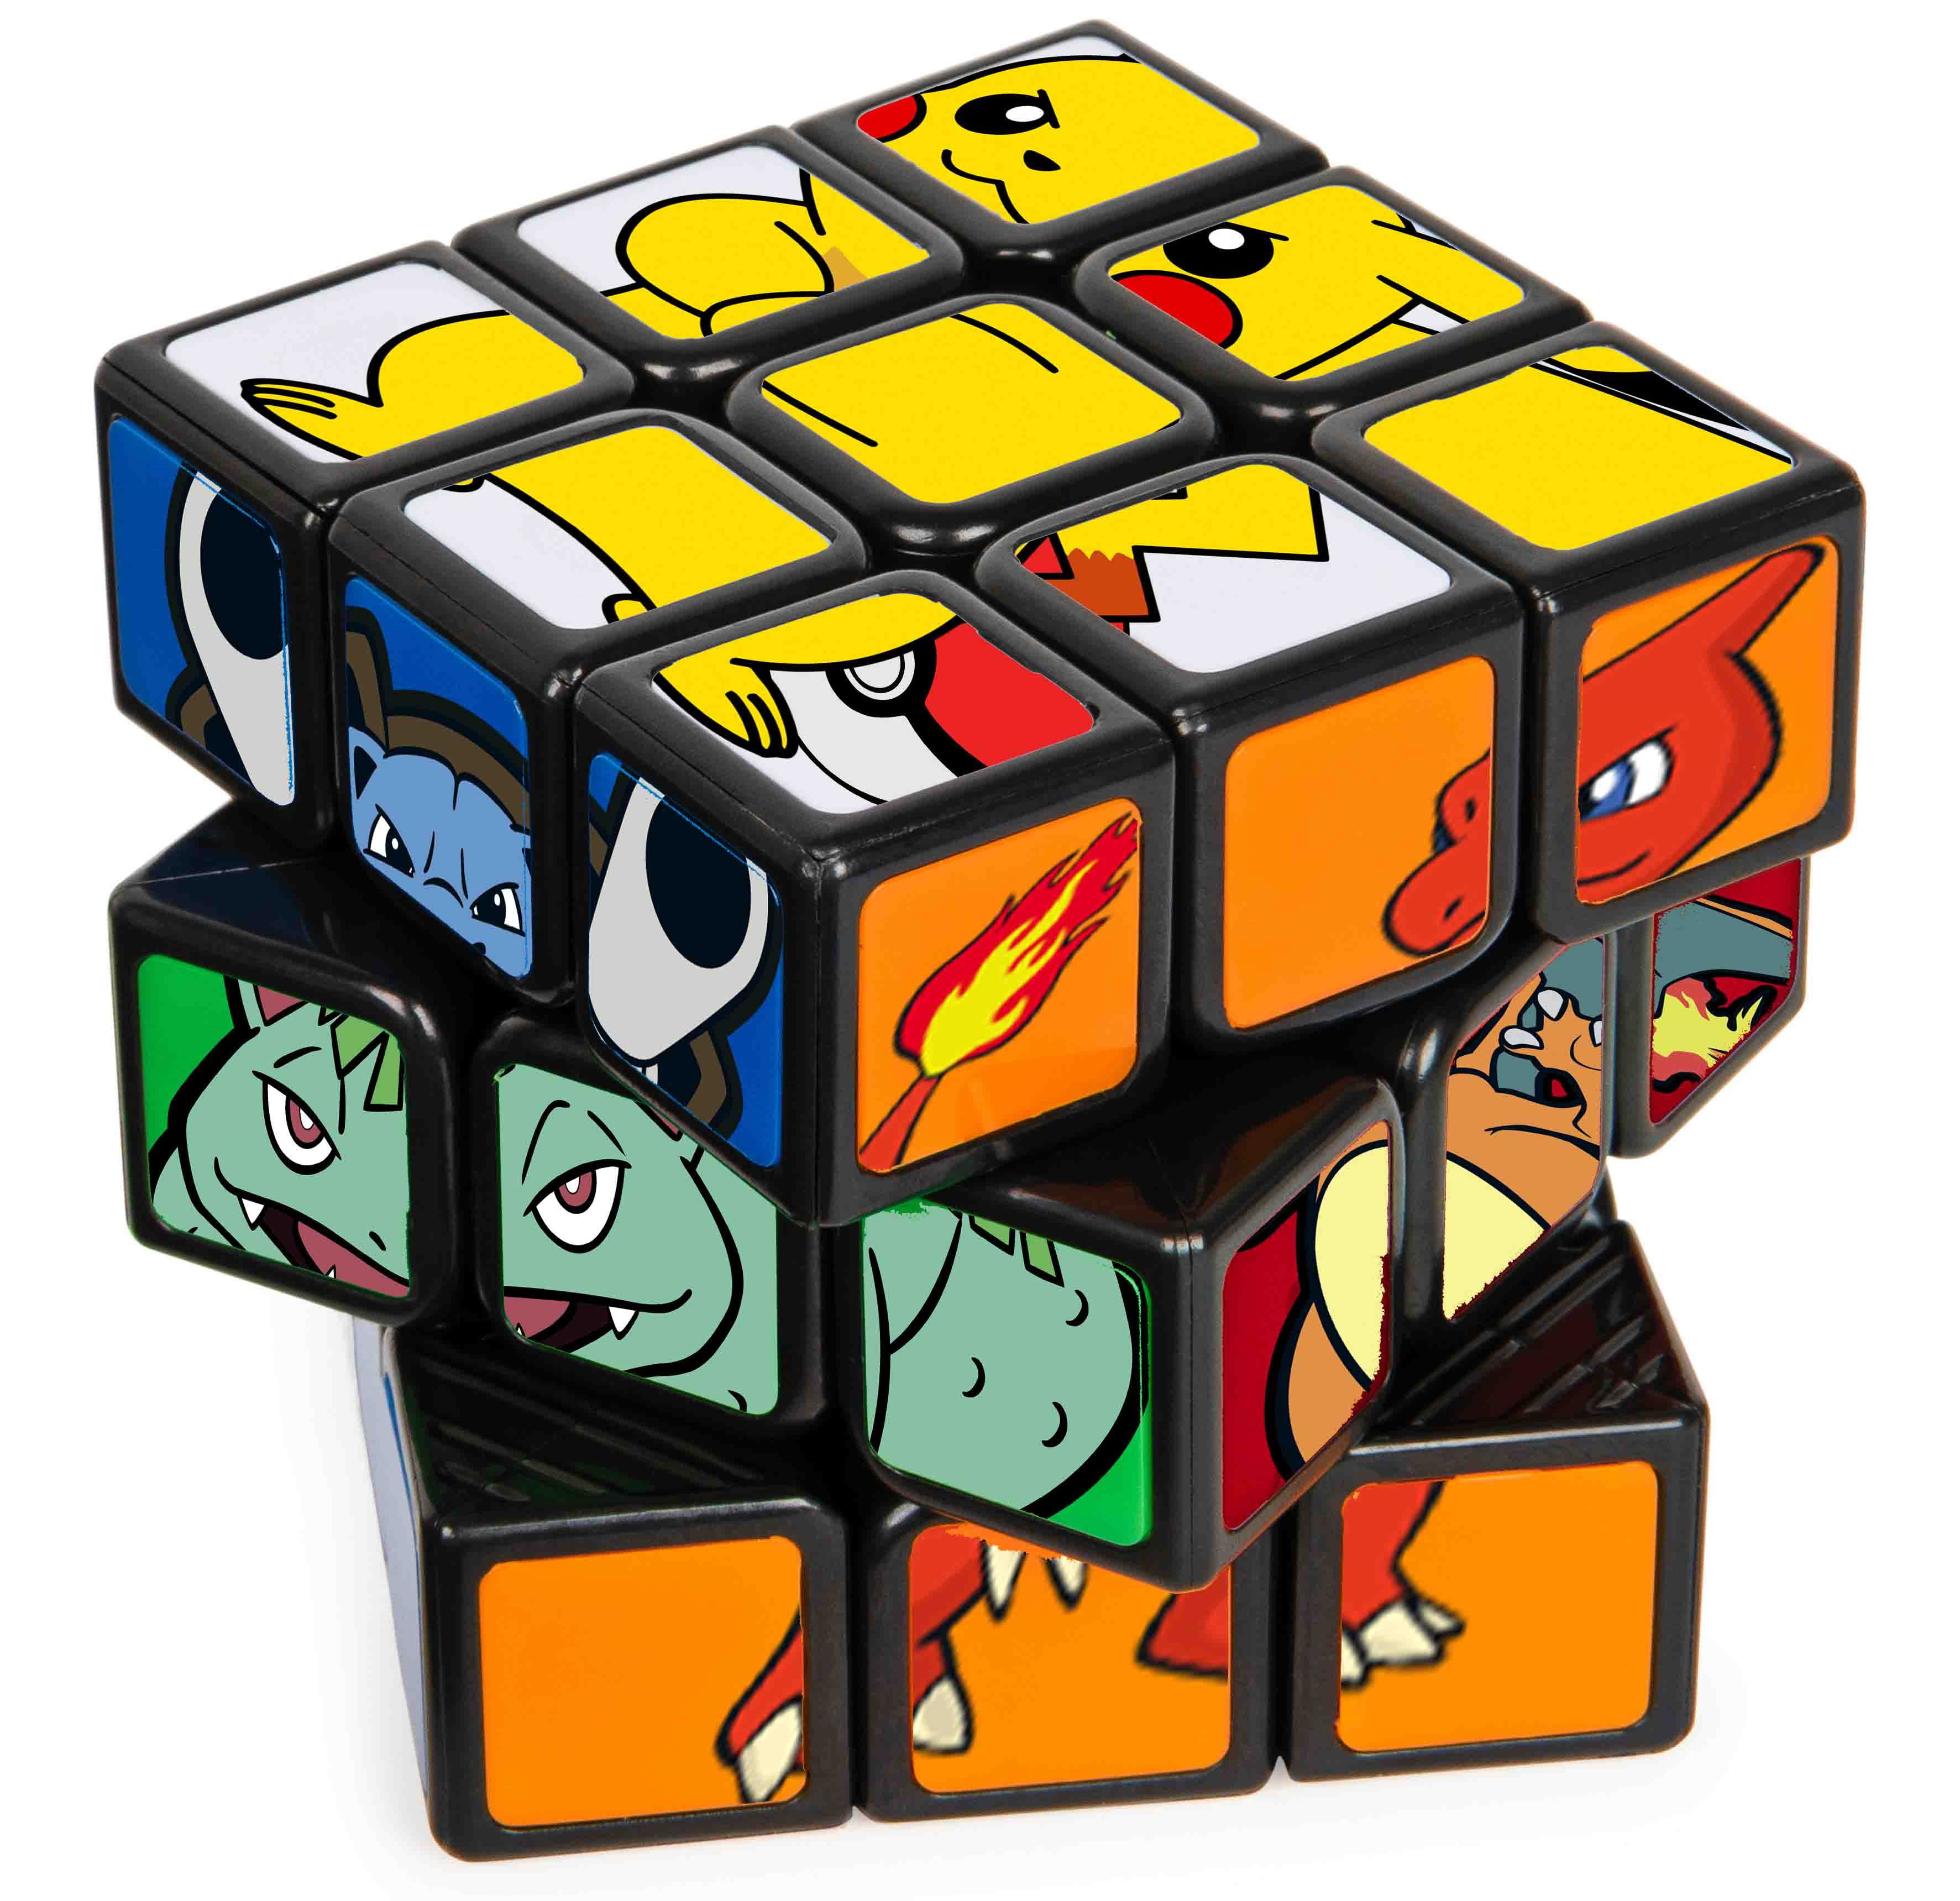  Yealvin Crazy Gear Cube, 3x3x3 Gear Magic Cube Twisty 3D Puzzle  Puzzle Cube Brain Teaser High Difficulty : Toys & Games